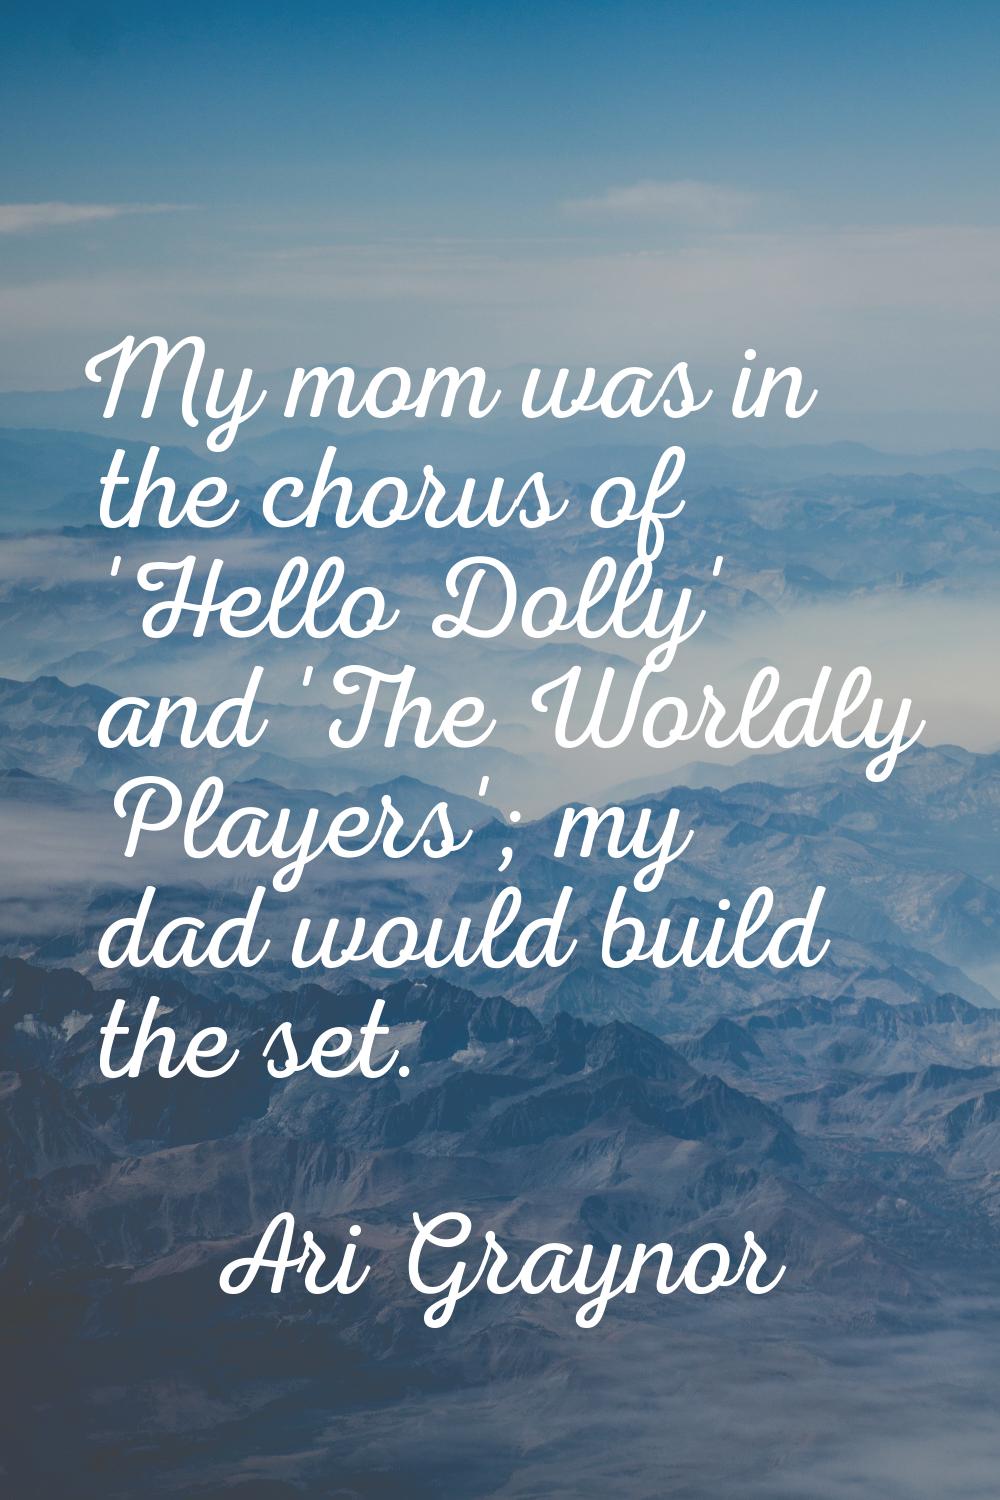 My mom was in the chorus of 'Hello Dolly' and 'The Worldly Players'; my dad would build the set.